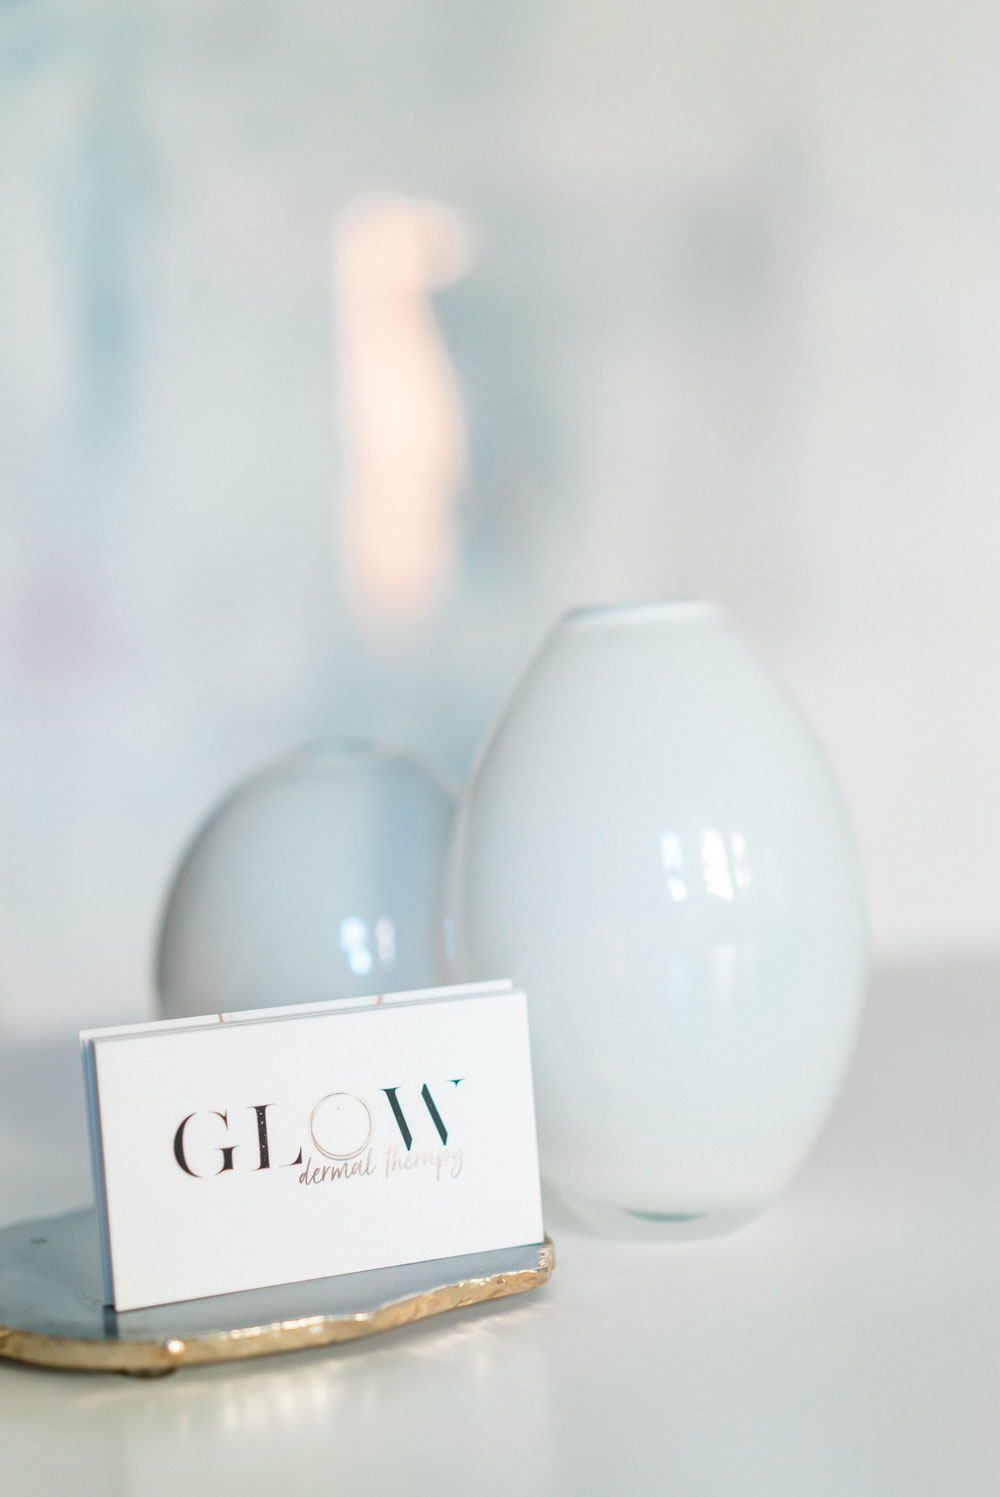 glow dermal therapy vancouver review by To Vogue or Bust